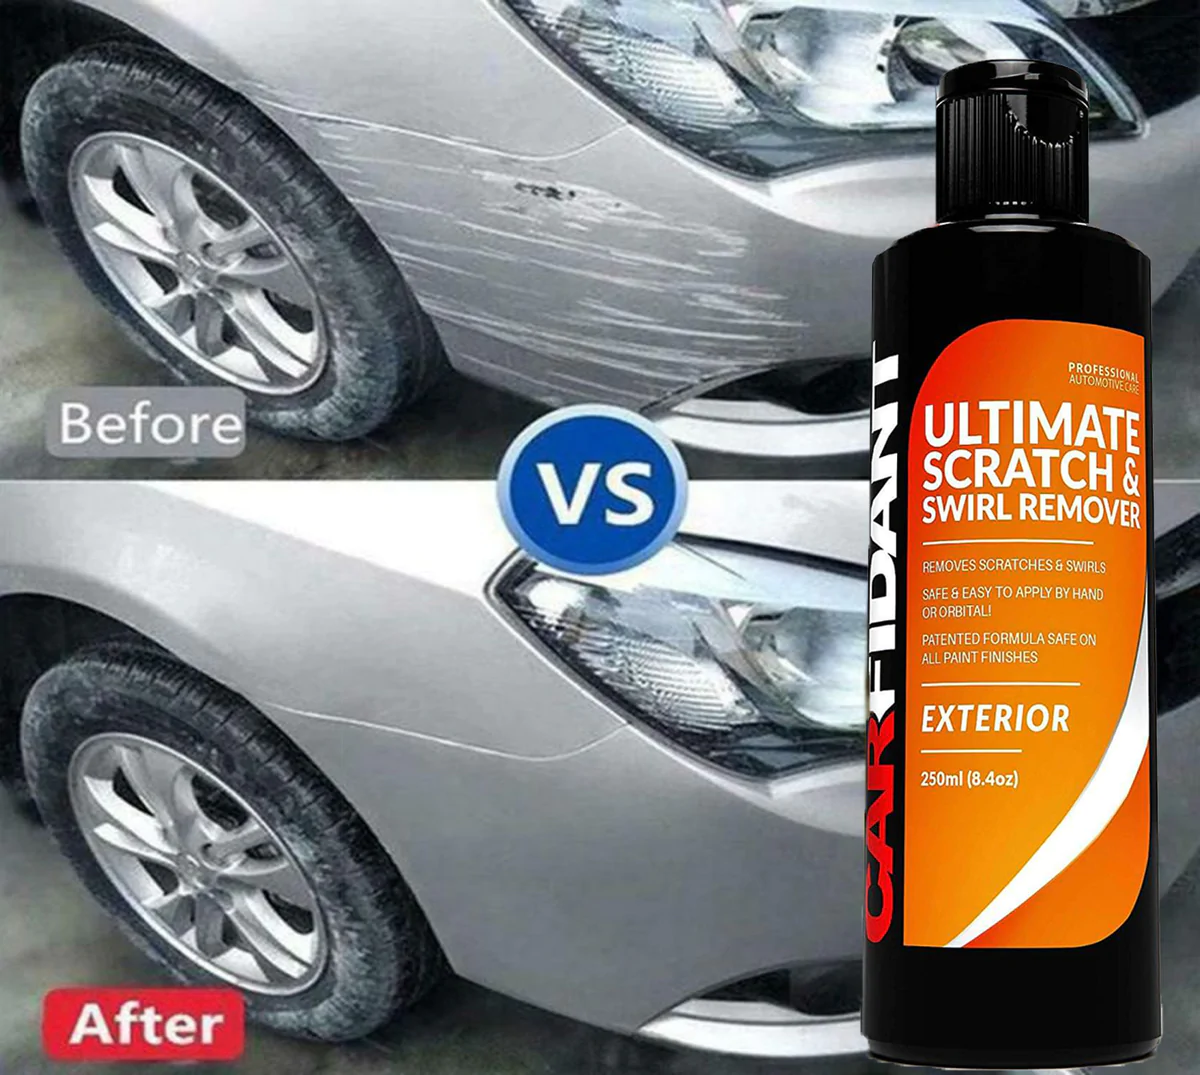 5) CARFIDANT Ultimate Scratch and Swirl Remover Car Polish (8.4 oz)